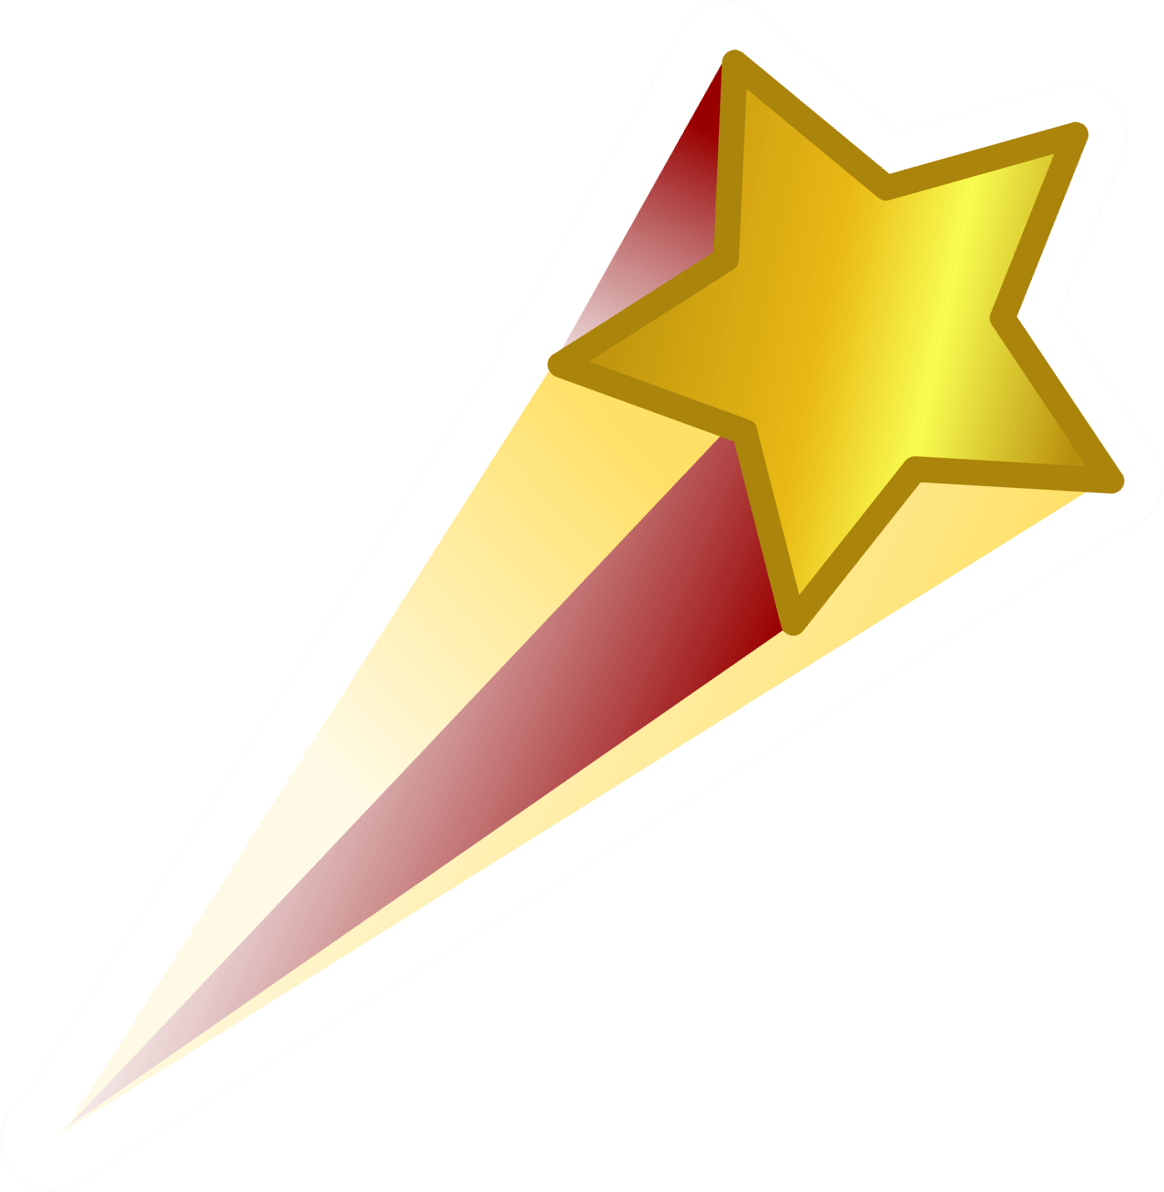 Red Gold Shooting Star transparent PNG.